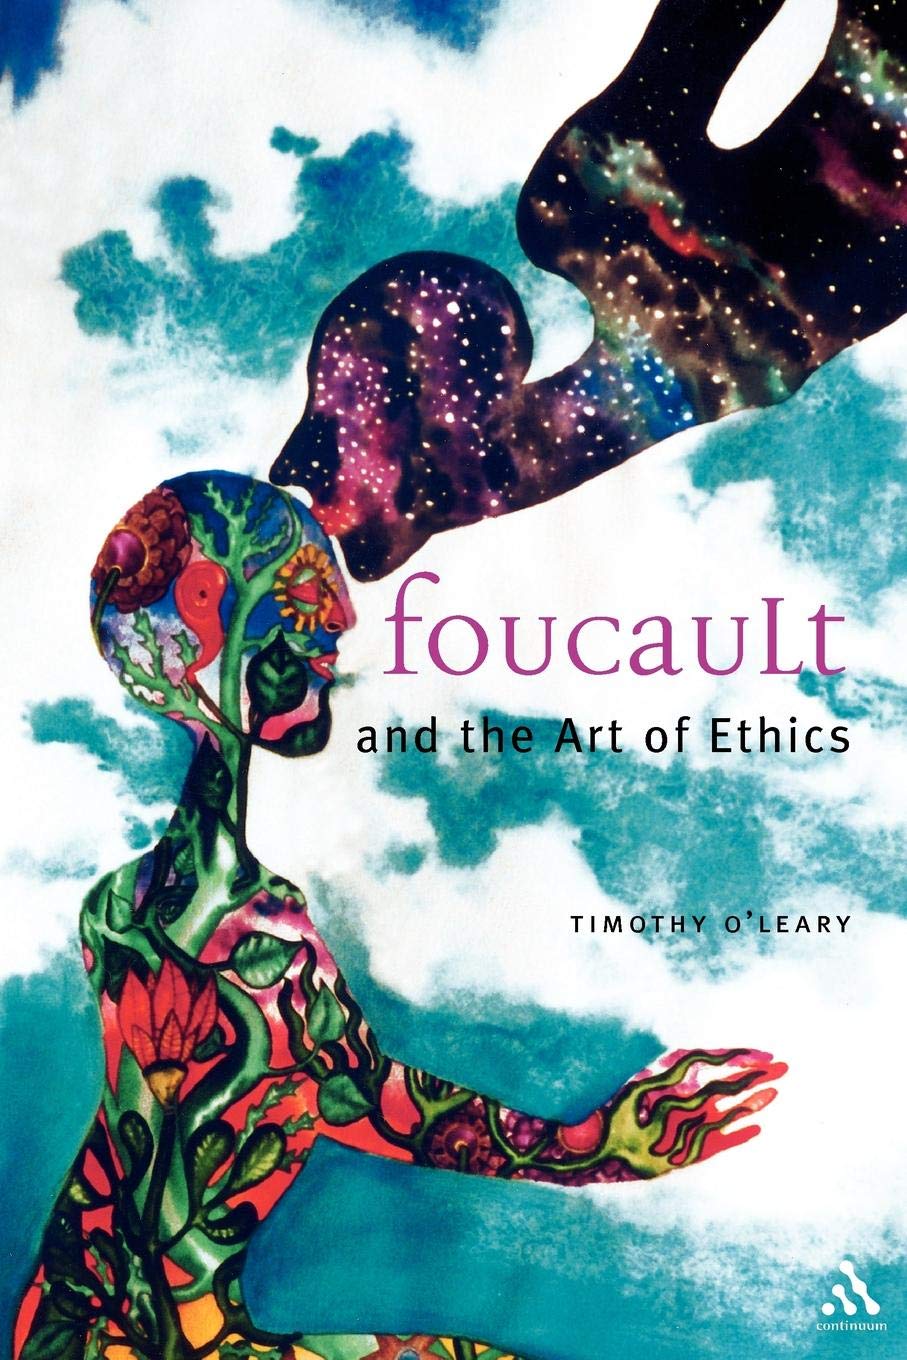 Foucault and the Art of Ethics (Continuum Collection Series)